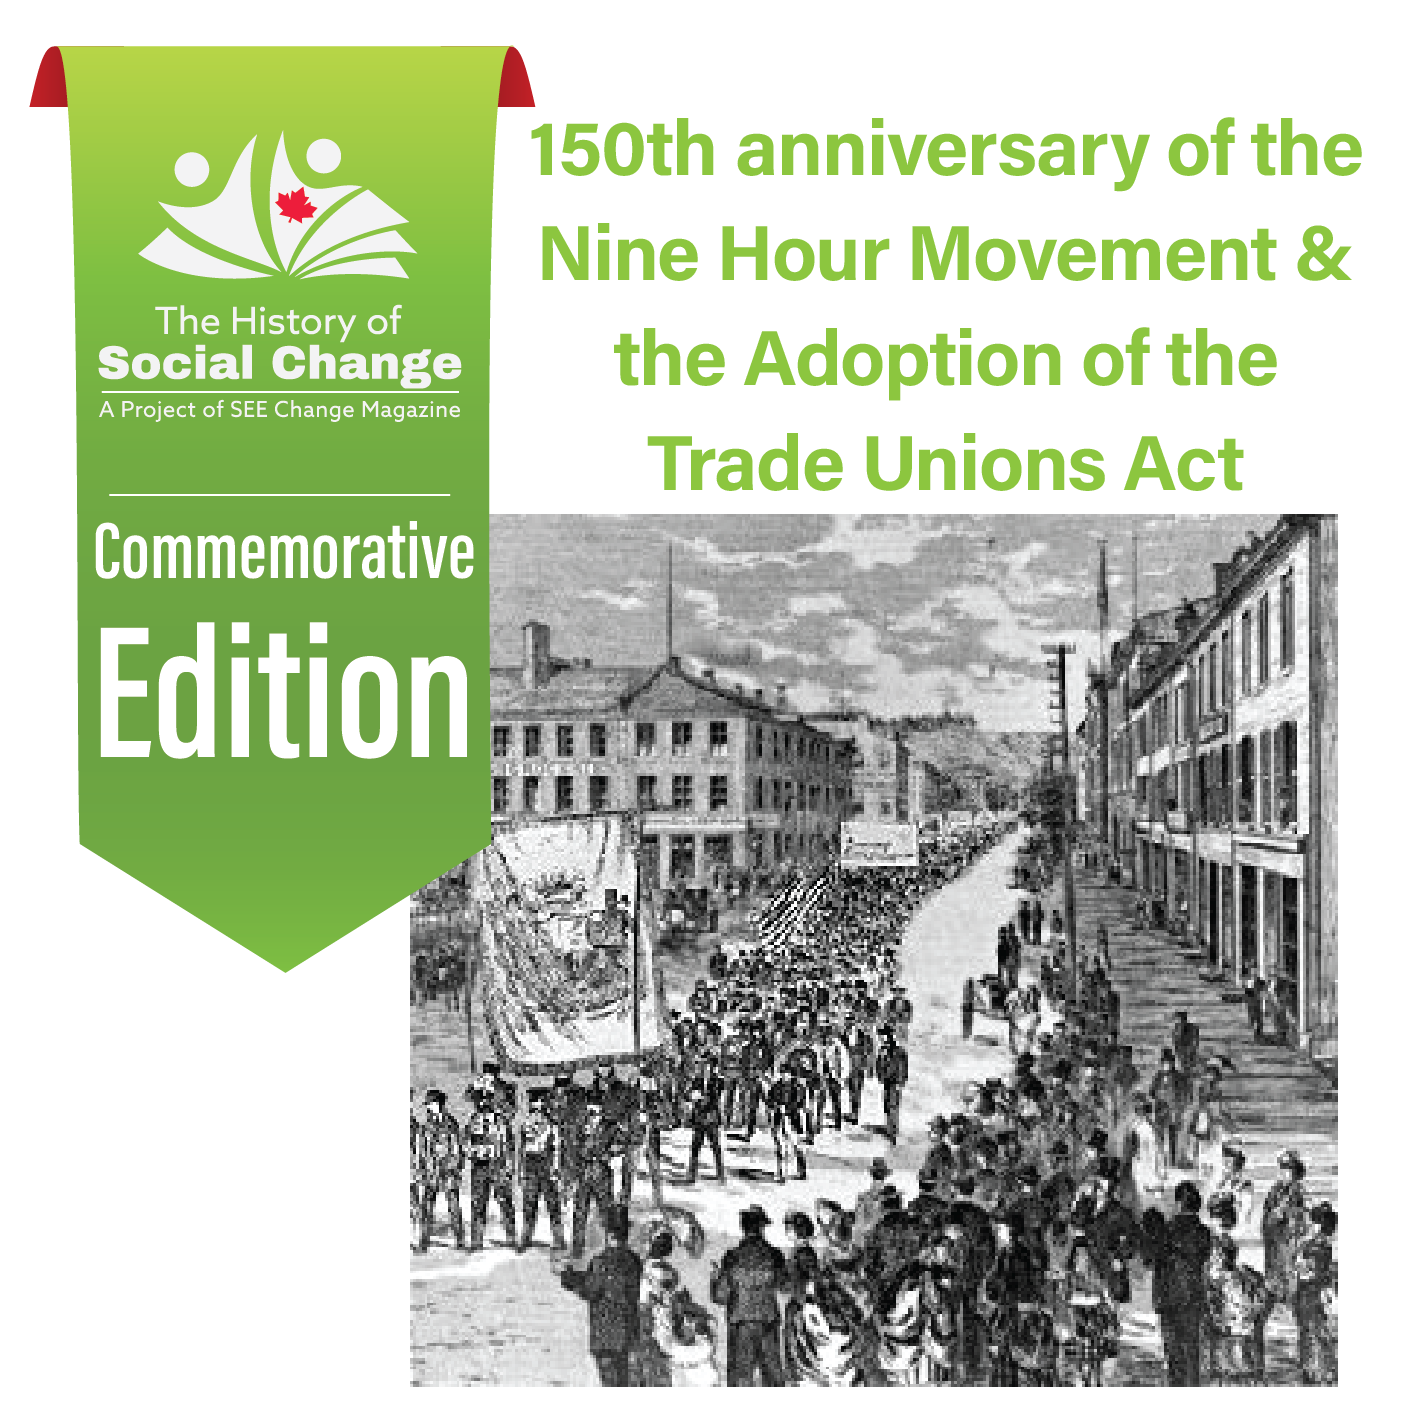 150th anniversary of the Nine Hour Movement & the Adoption of the Trade Unions Act